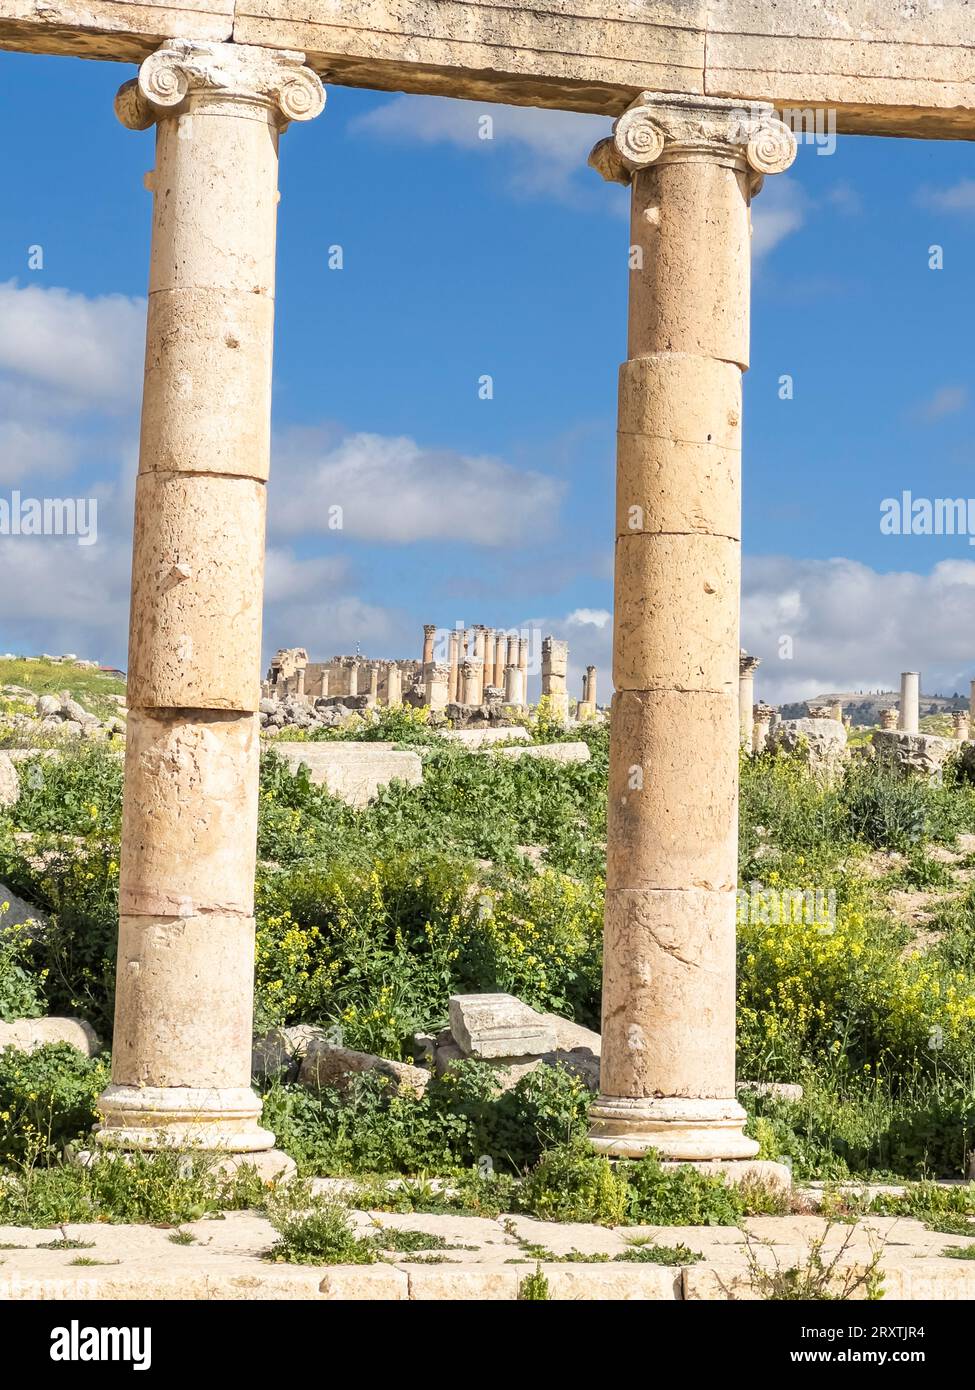 Columns in the Oval Plaza in the ancient city of Jerash, believed to be founded in 331 BC by Alexander the Great, Jerash, Jordan, Middle East Stock Photo